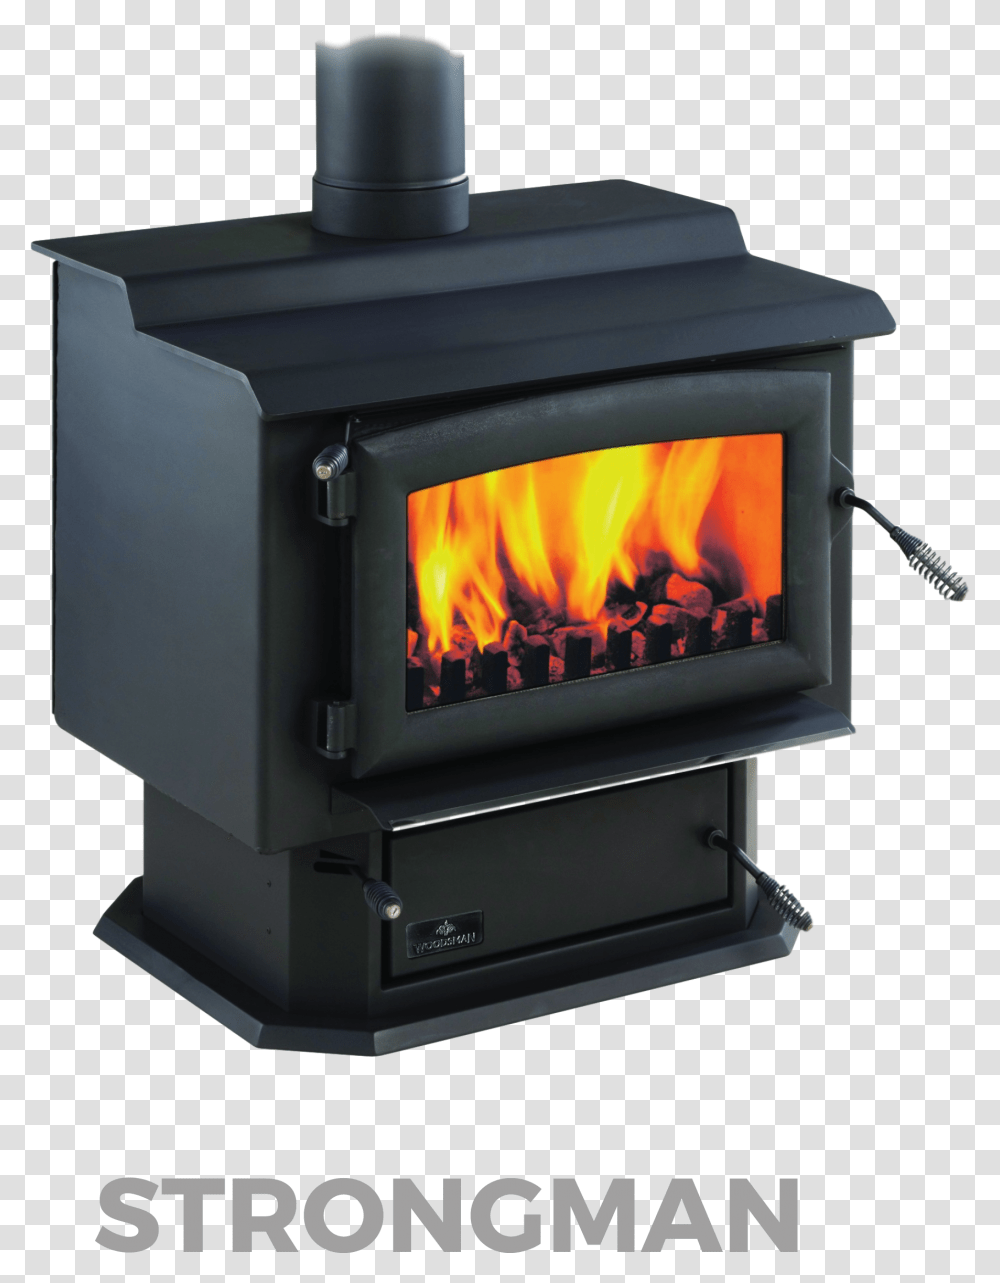 Wood Burners Christchurch Woodsman Fires Stove, Oven, Appliance, Mailbox, Letterbox Transparent Png